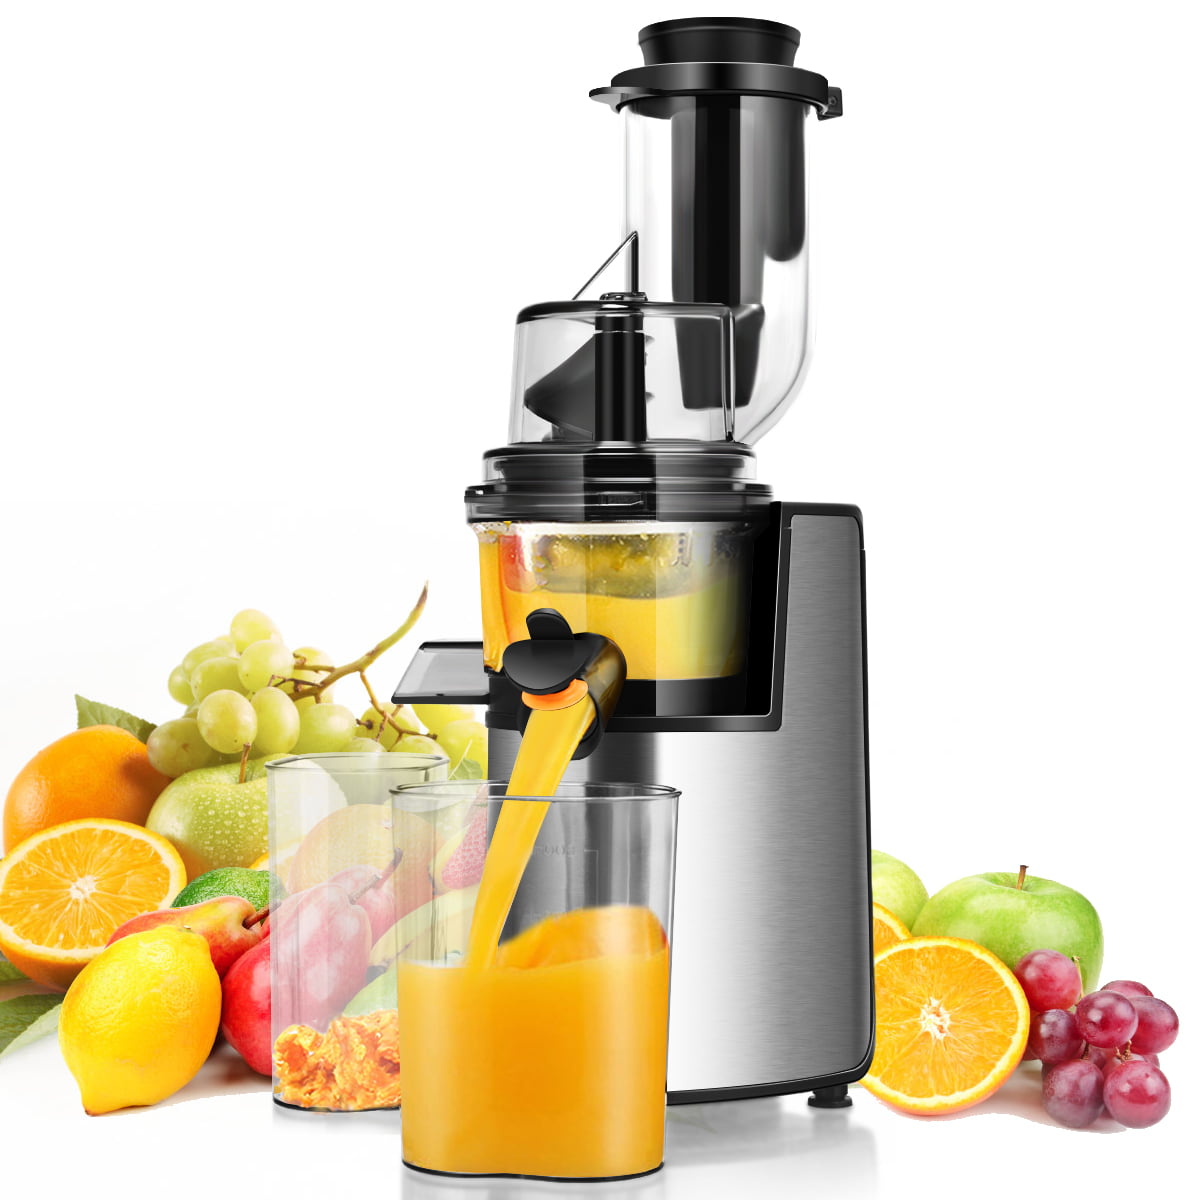 BPA-Free COSTWAY Slow Juicer Masticating Machine with 3.4 inch Wide Chute Stainless Steel Juicer Extractor with Cold Press Masticating Squeezer Technology Easy-to-Clean Quiet Motor & Reverse Function 